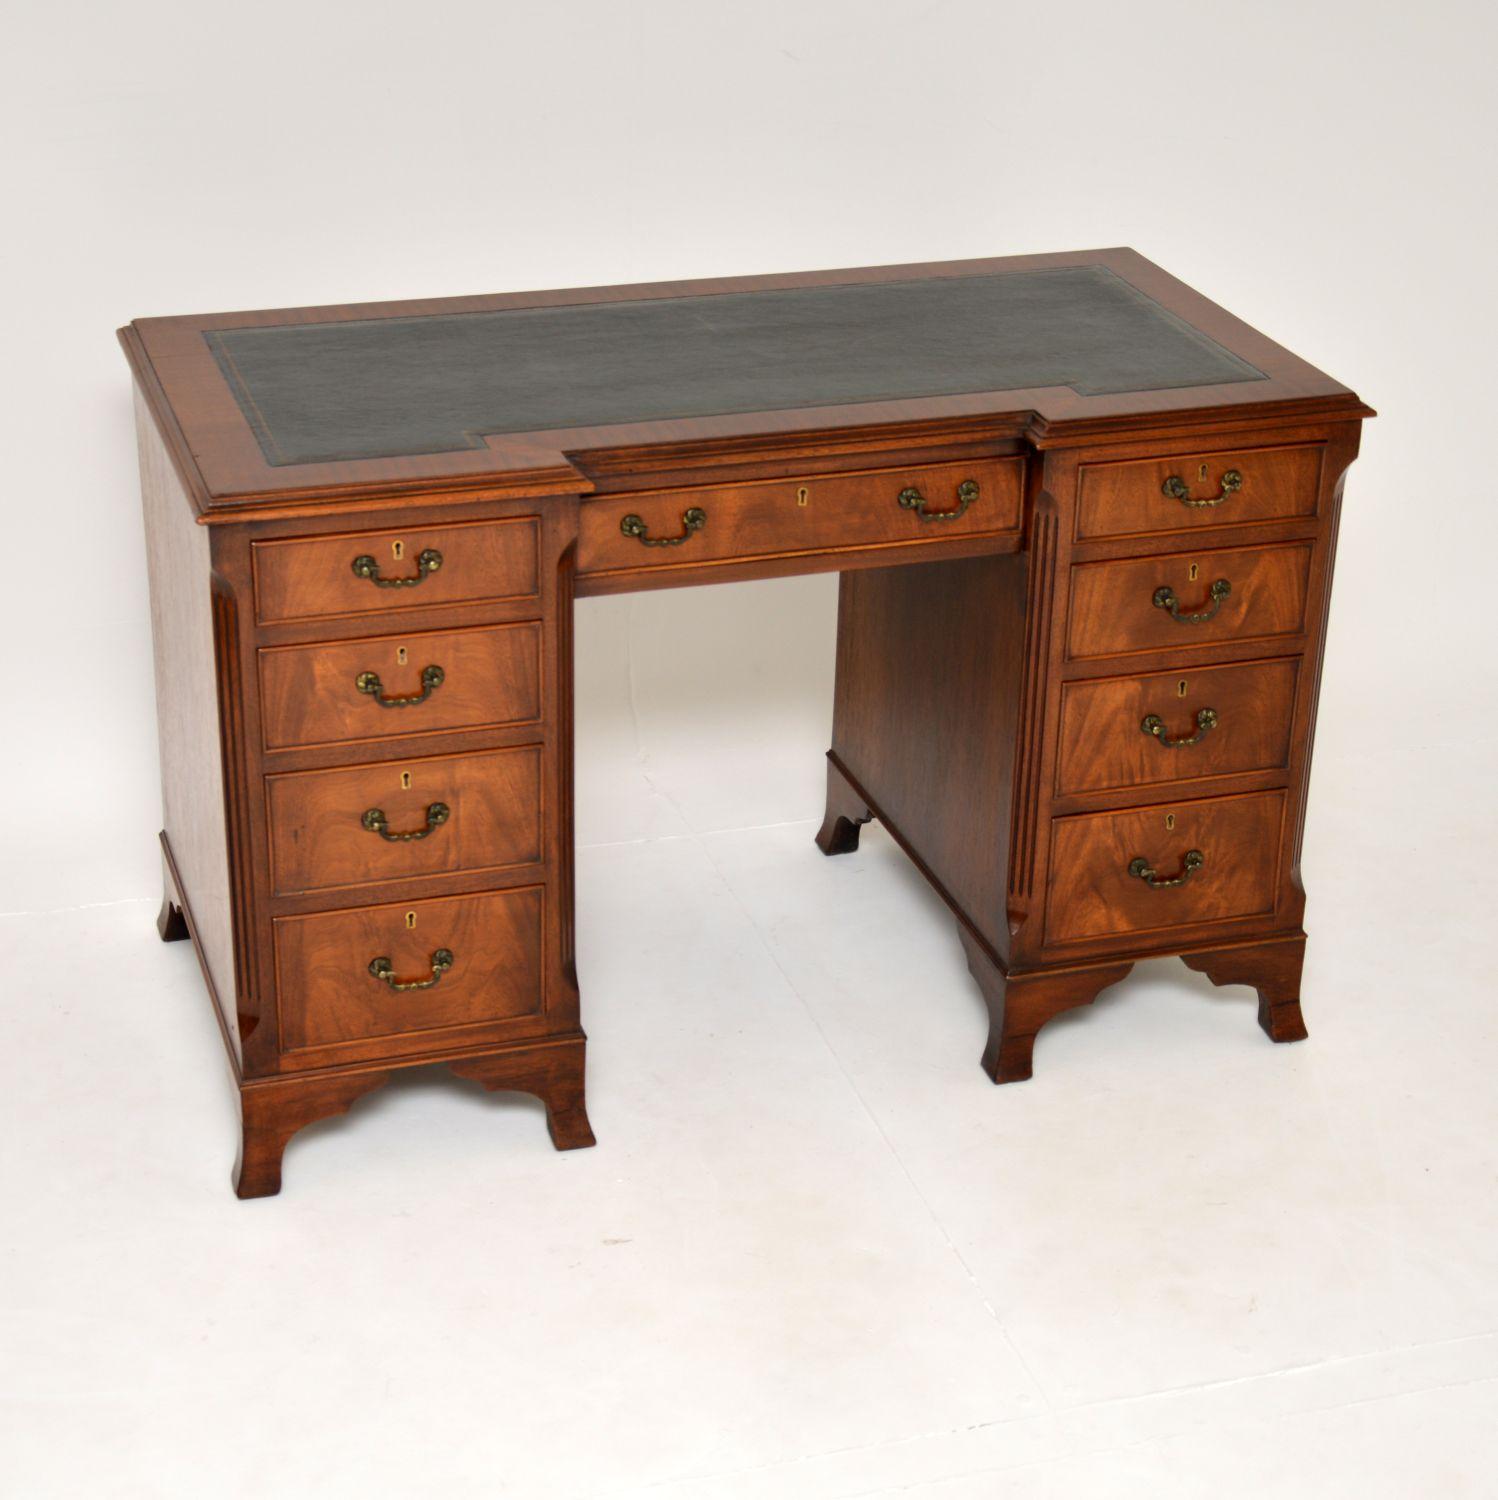 A superb antique leather top desk in wood. This was made in England in the Georgian revival style & I would date it to around the 1910-20’s period.

The quality is fantastic, this is very sturdy and well built. It is one fixed piece, the front has